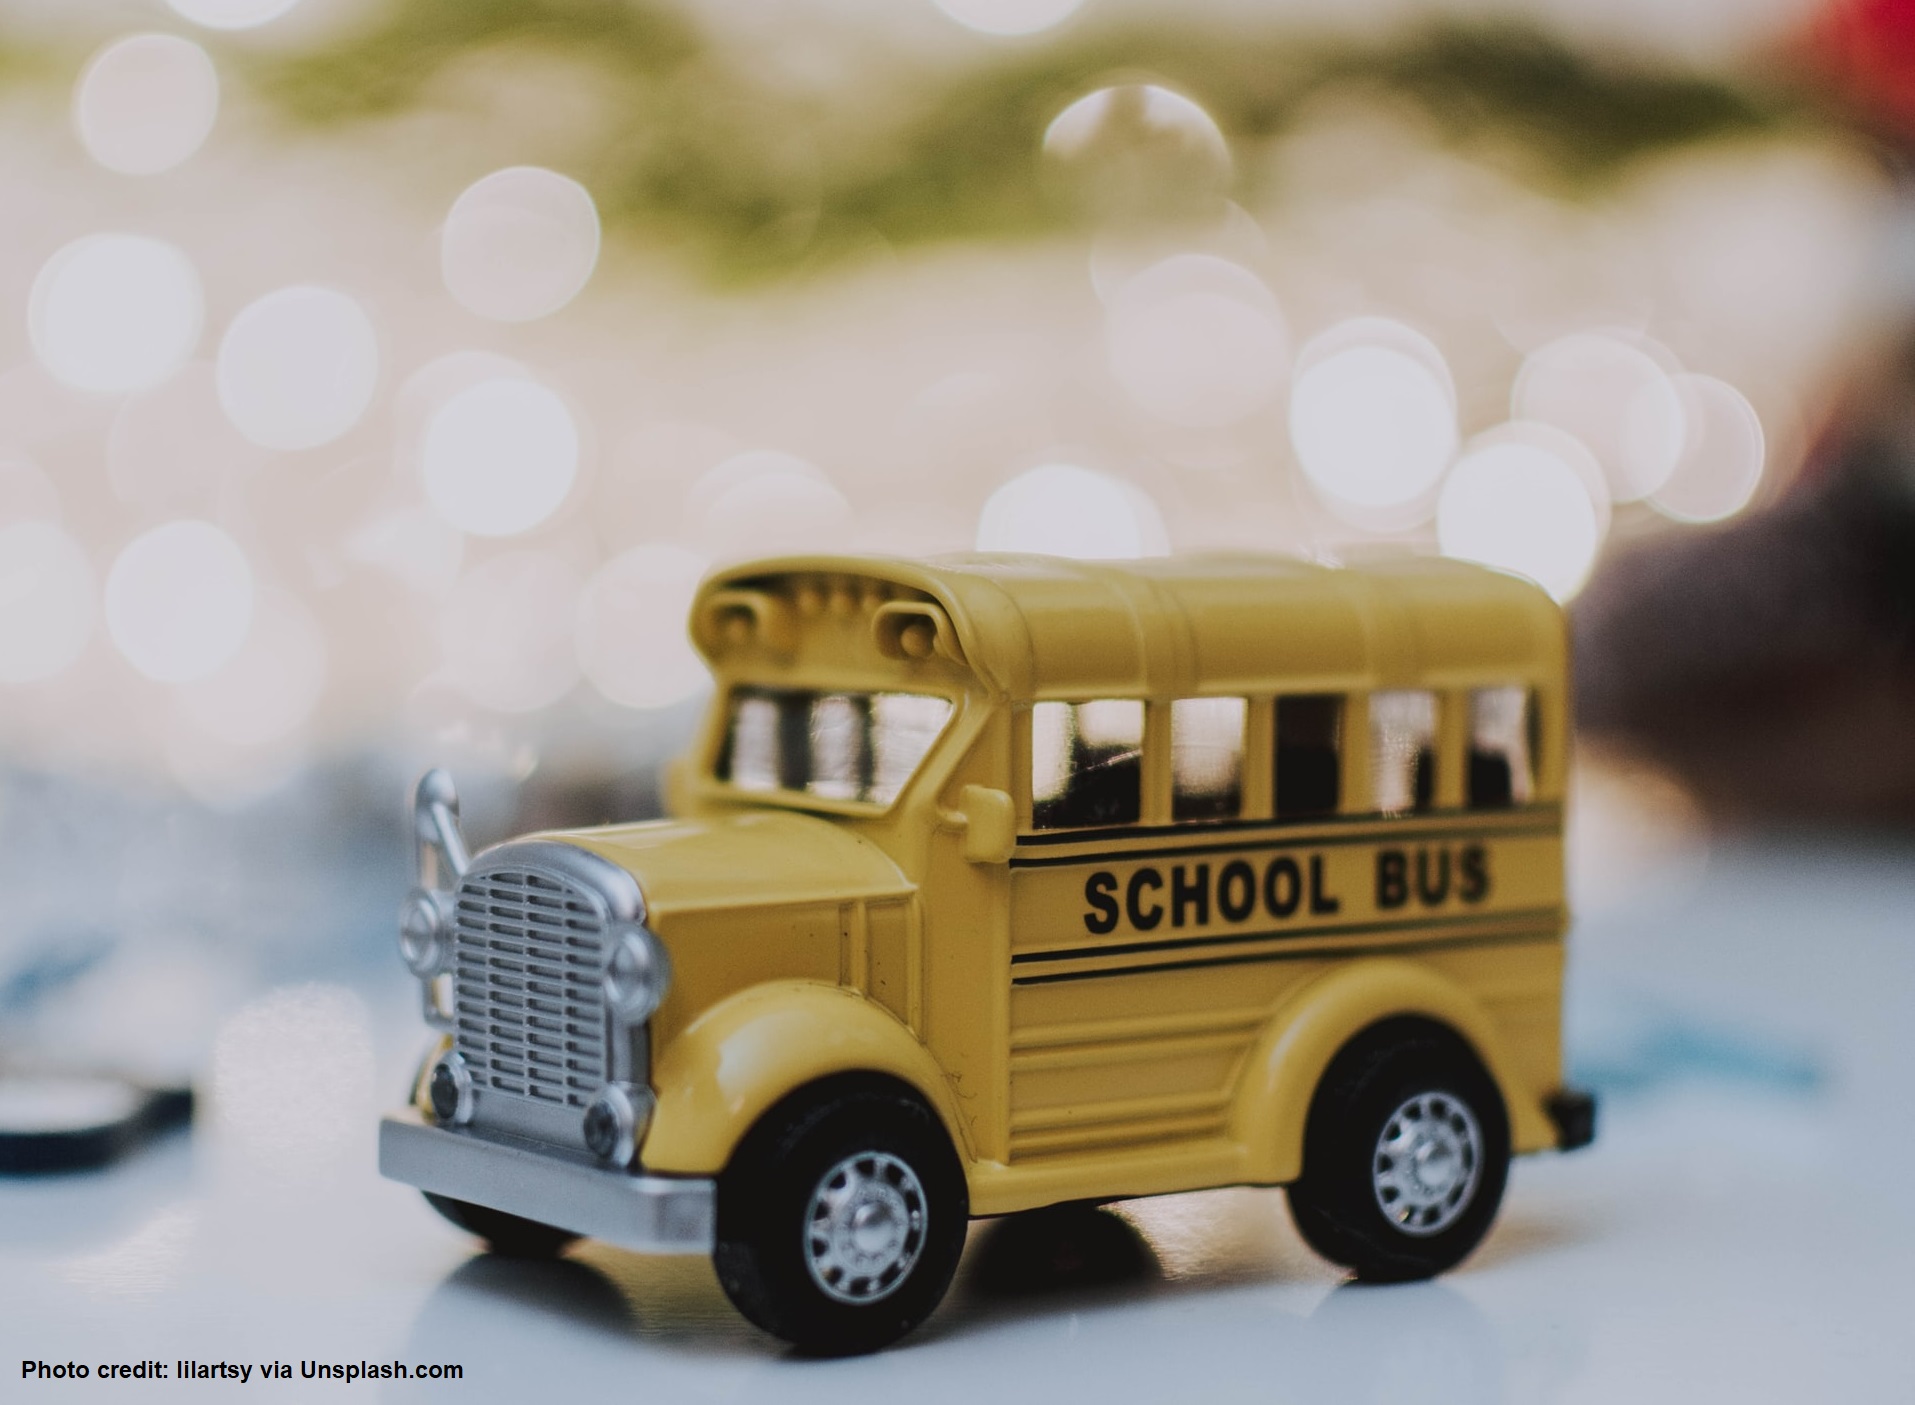 A toy yellow school bus